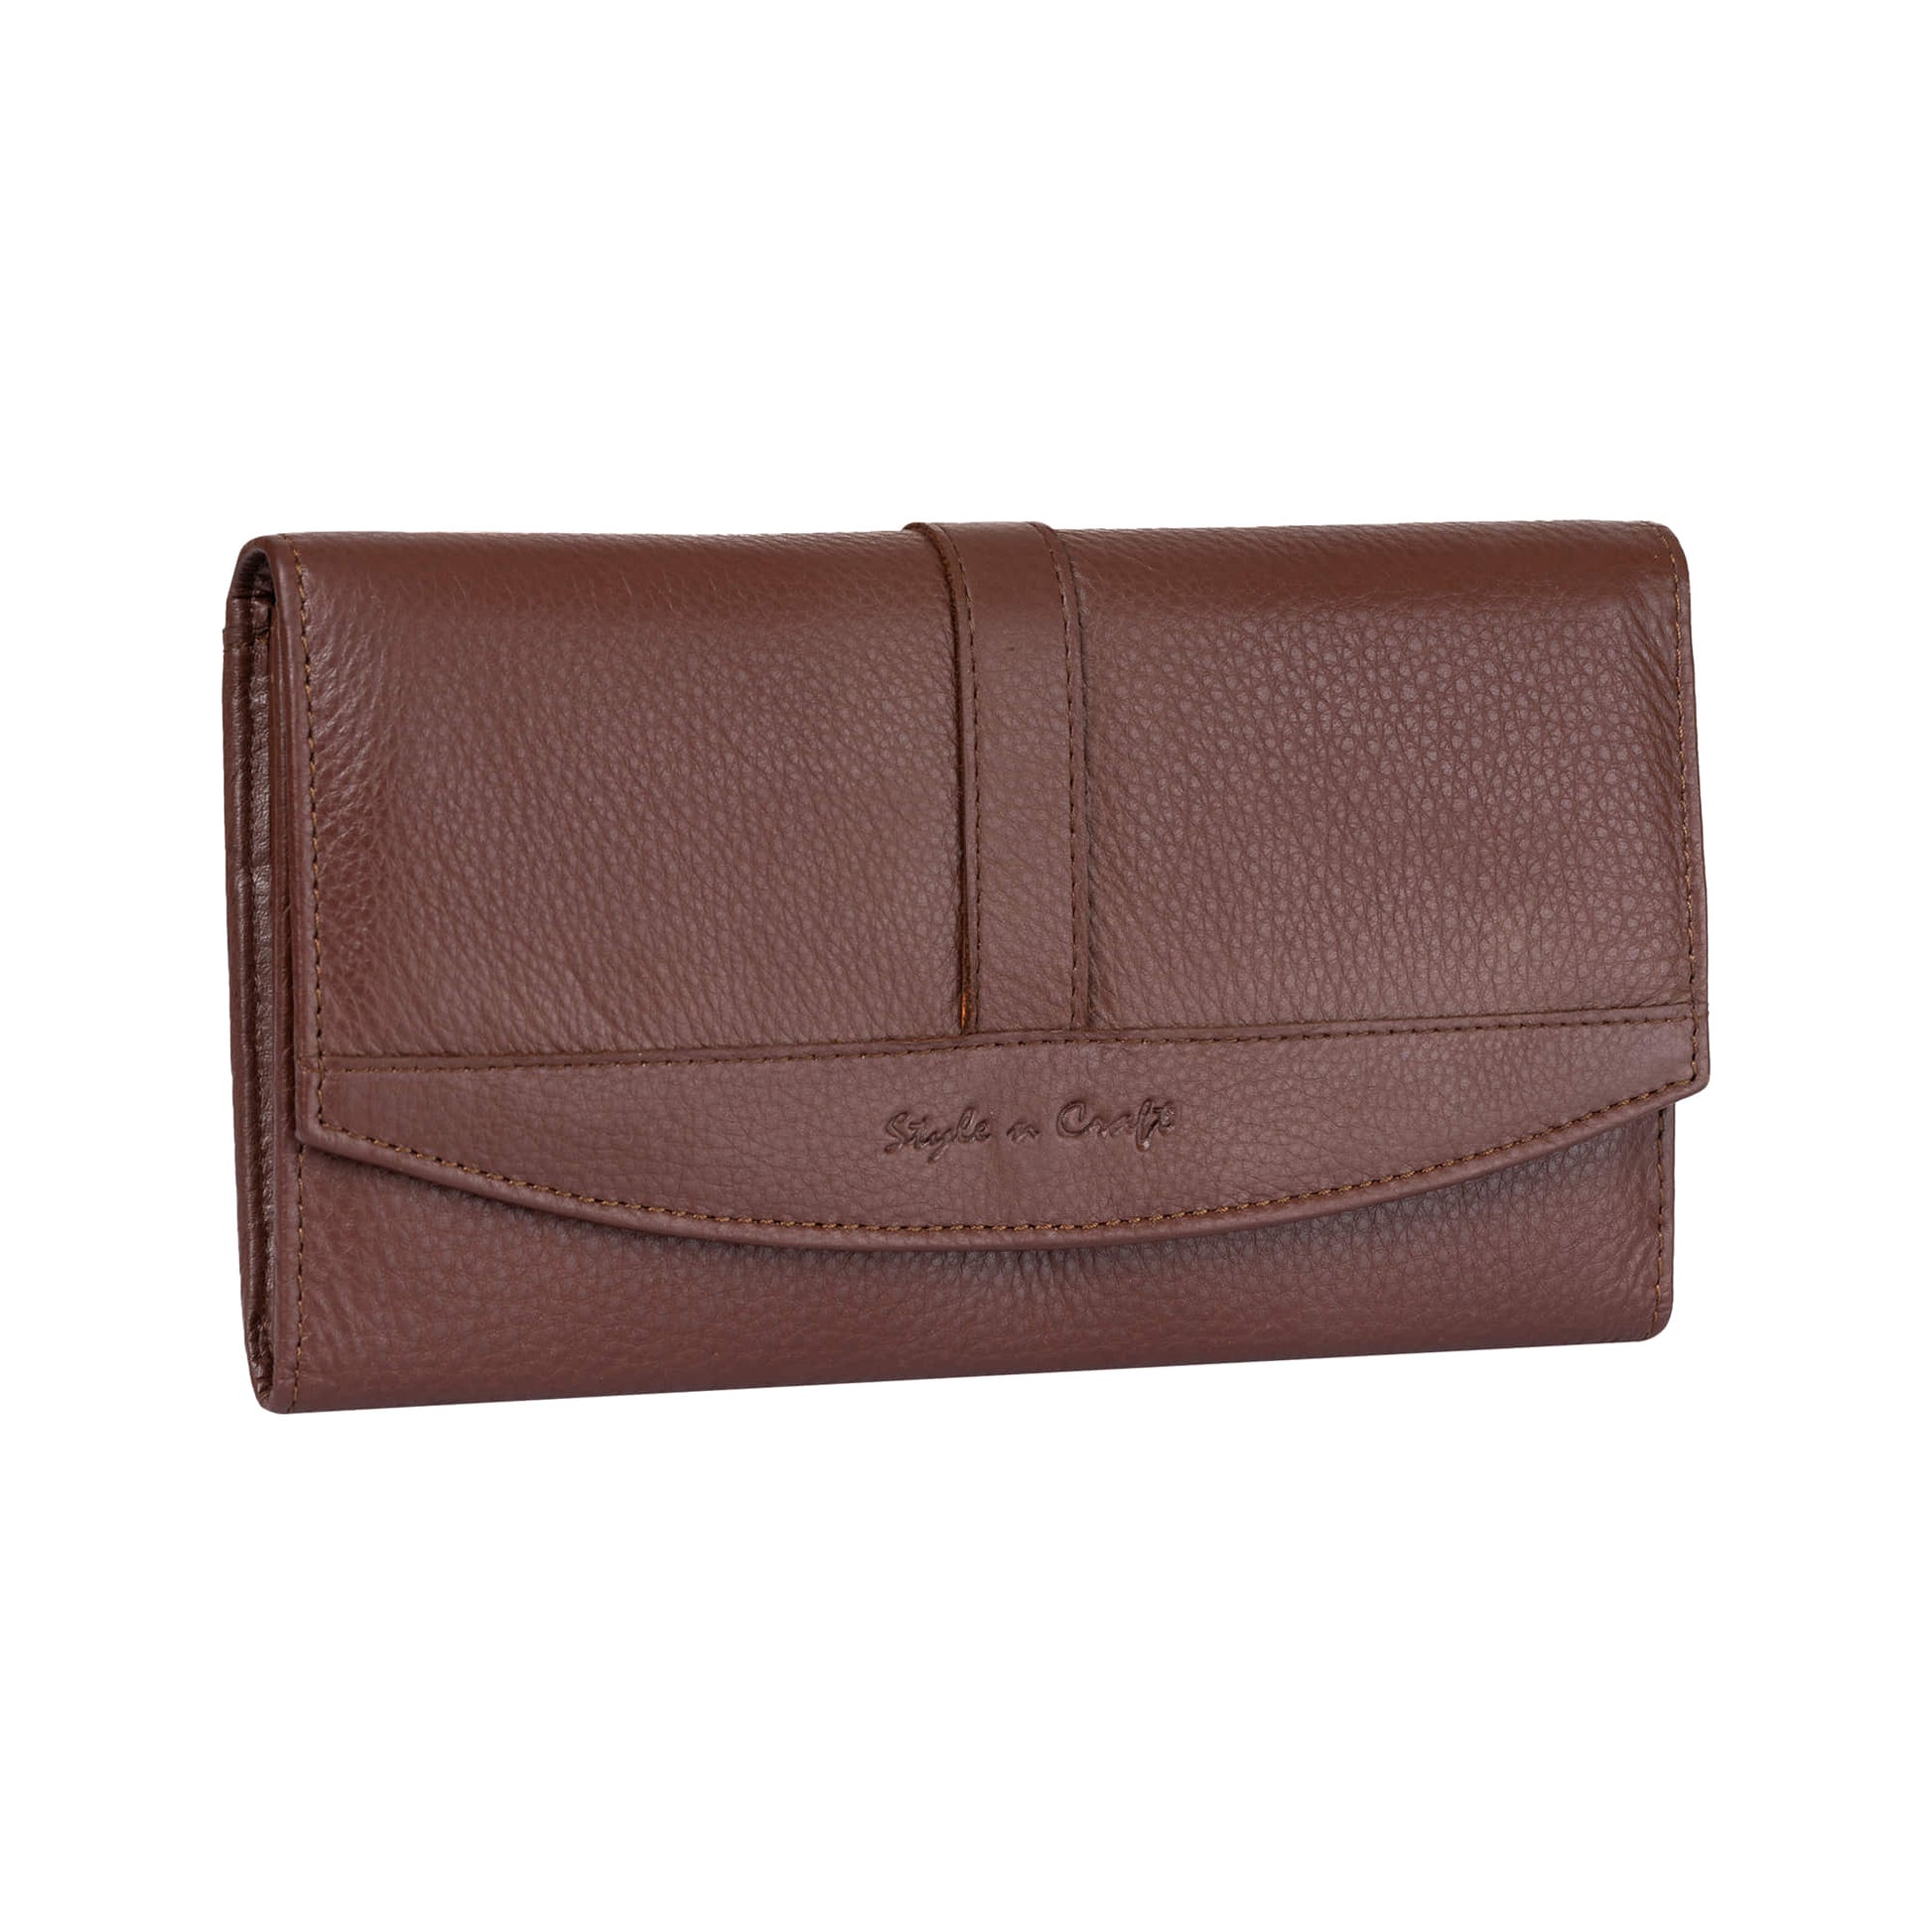 Style n Craft 391105 Double Fold Ladies Long Clutch Wallet in High Grade Brown Full Grain Leather - Front Angled View - Closed